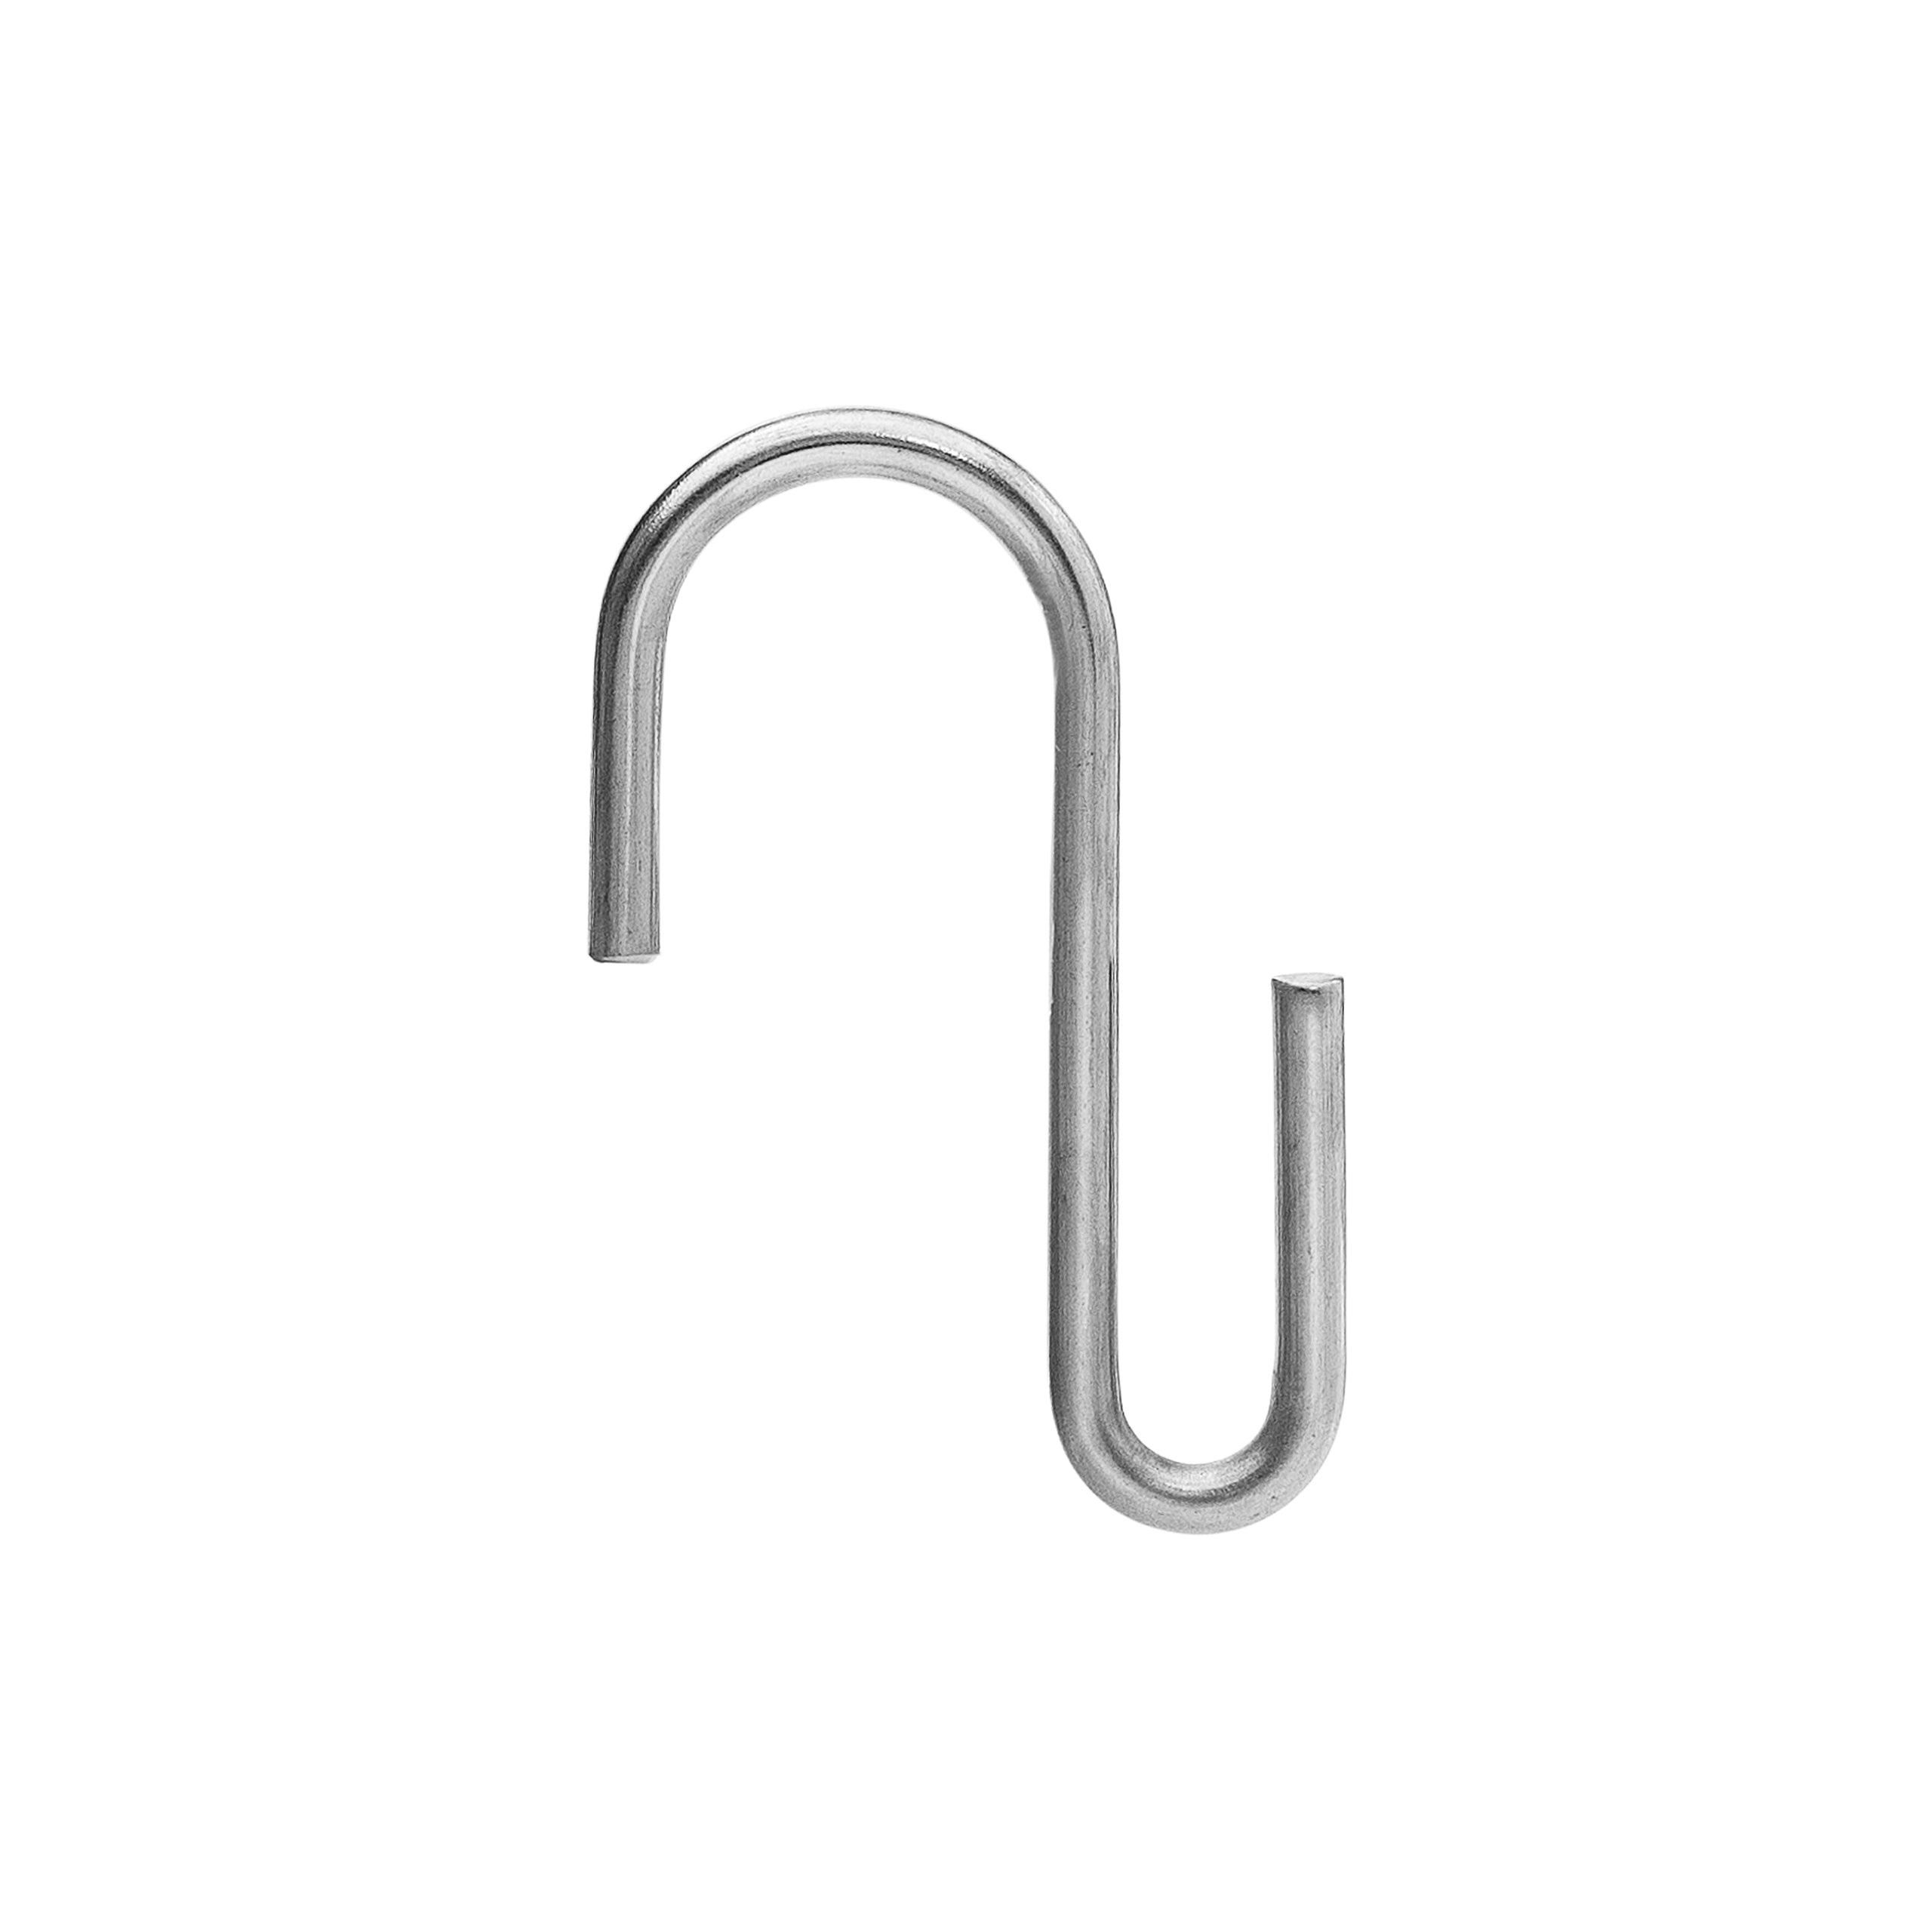 Small Size Heavy Duty S Metal Hooks - Silver Colour